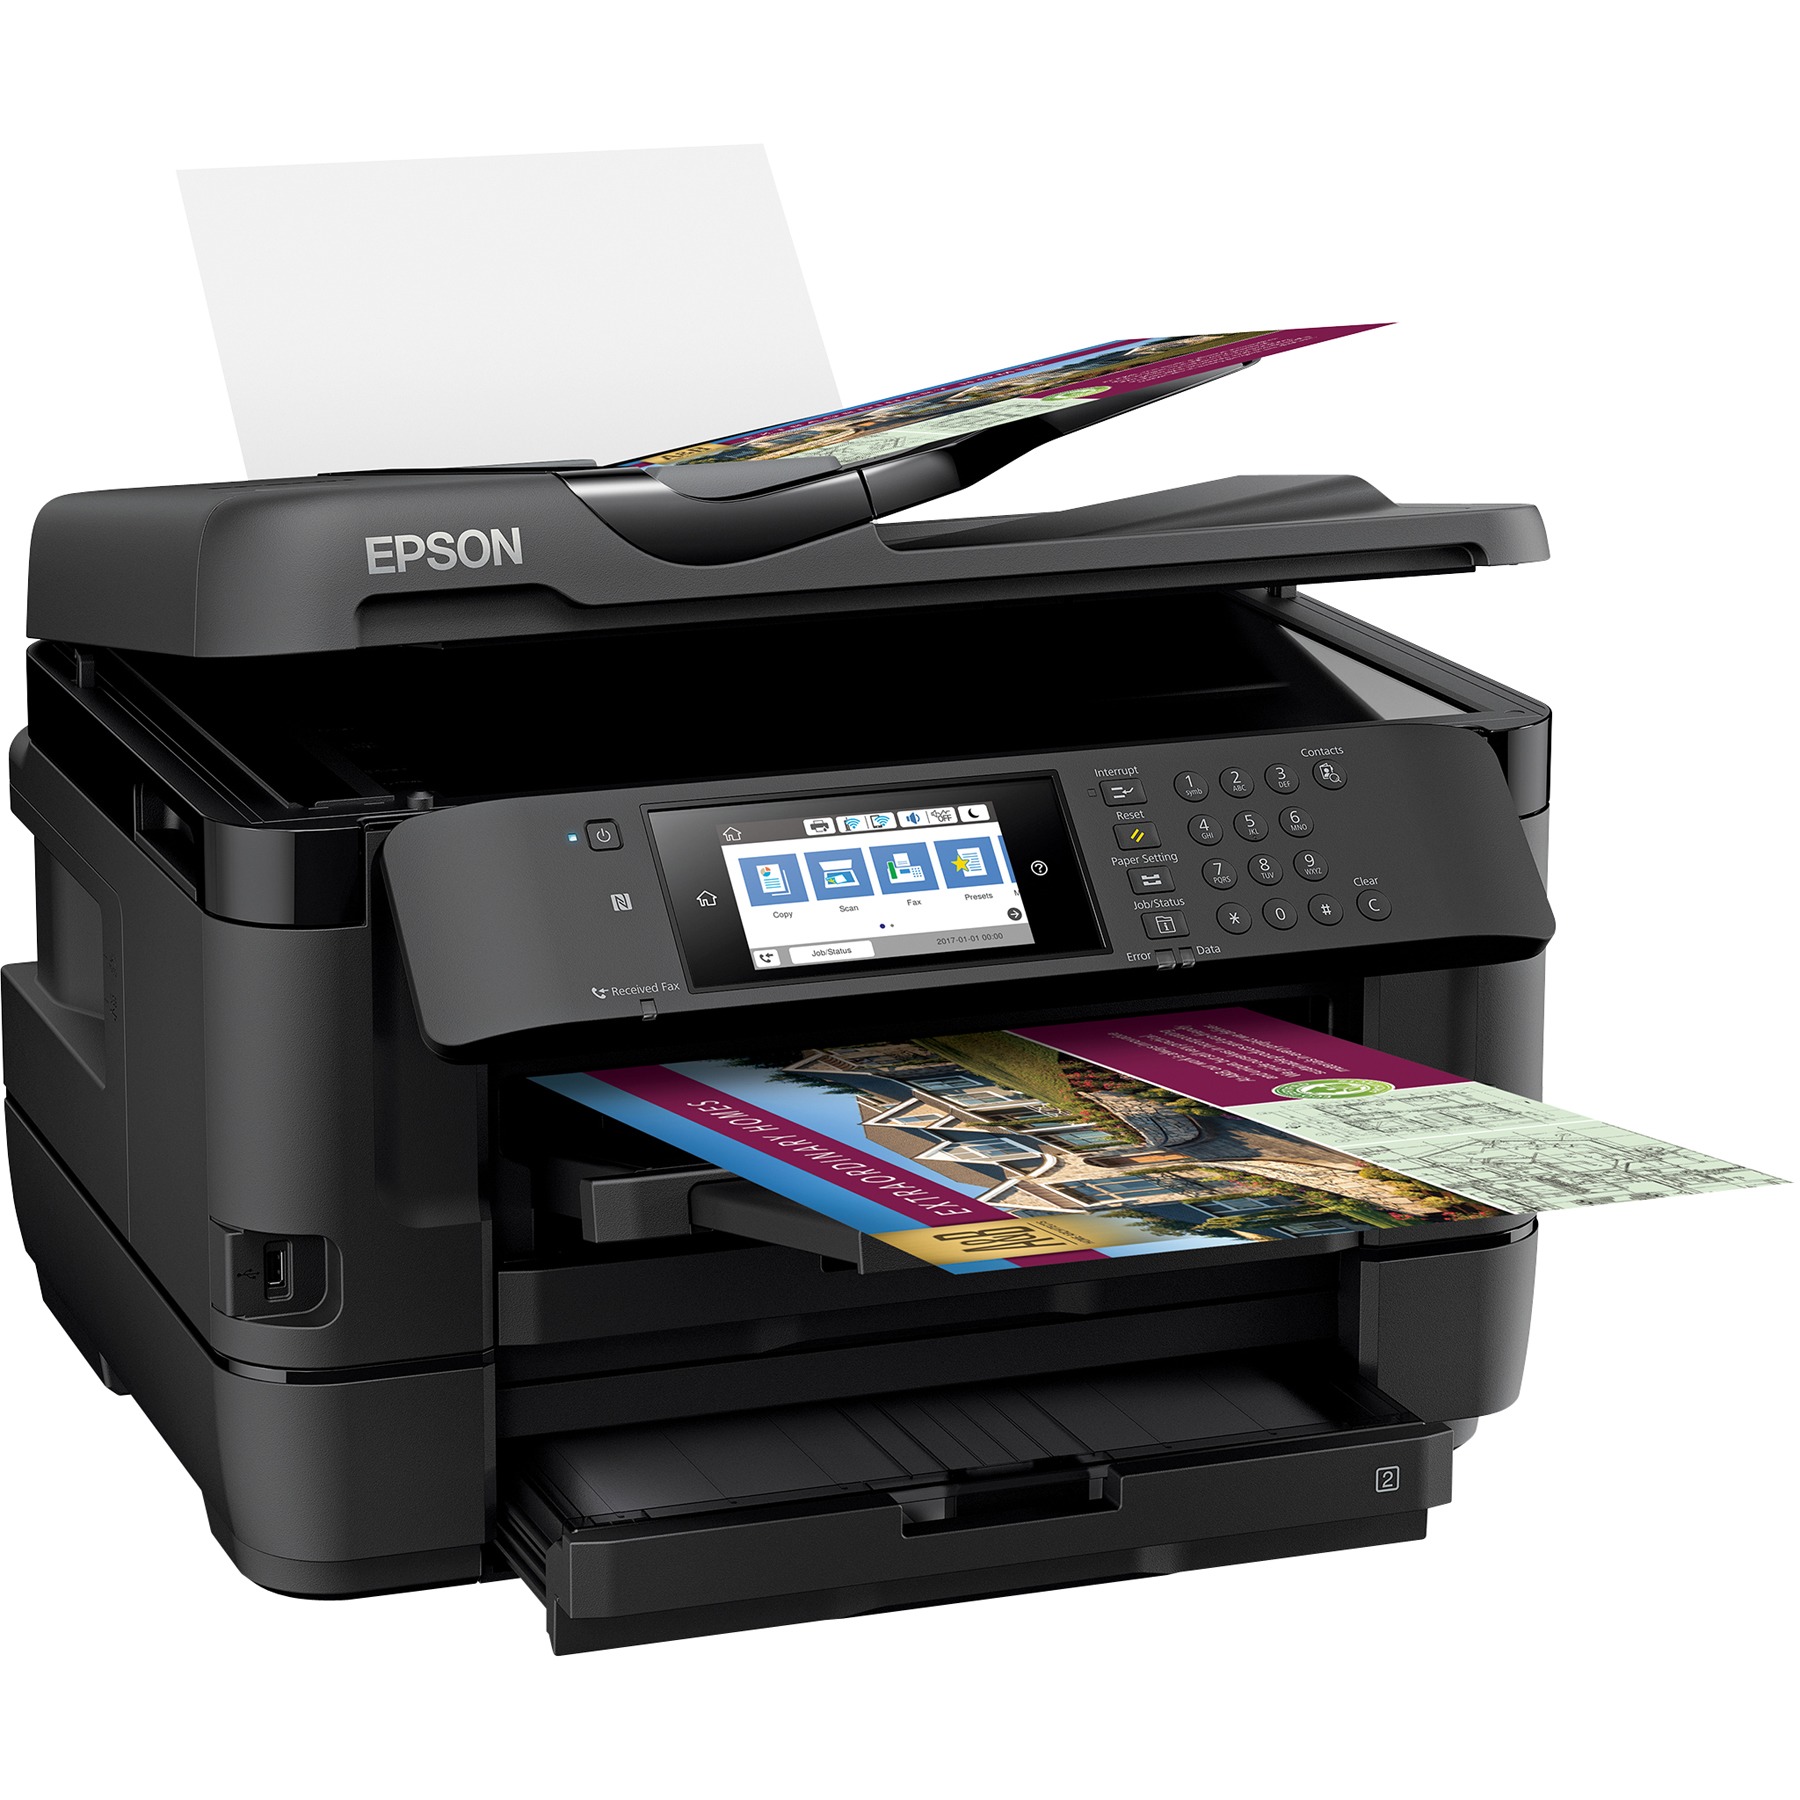 Epson WorkForce WF-7720 Wireless Wide-format Color Inkjet Printer with Copy, Scan, Fax, Wi-Fi Direct and Ethernet - image 2 of 5